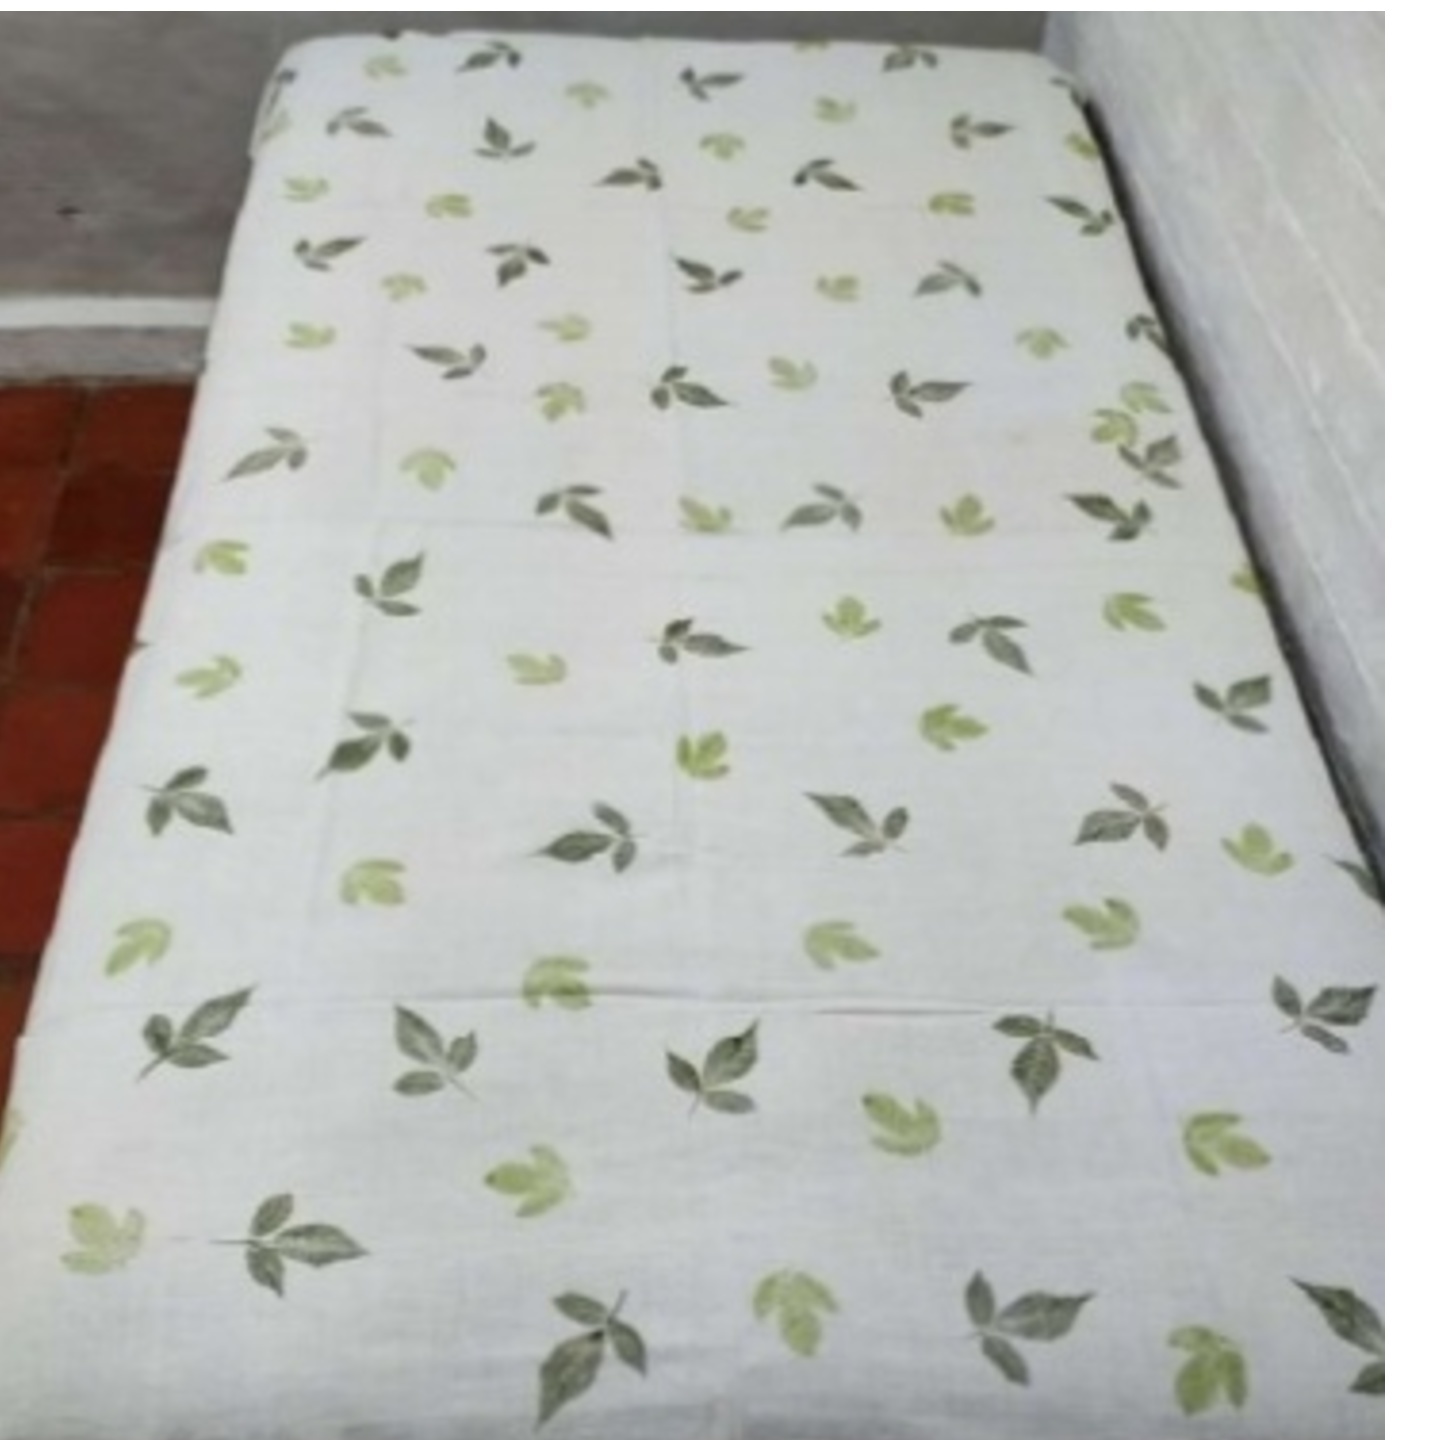 Single Bed Cover